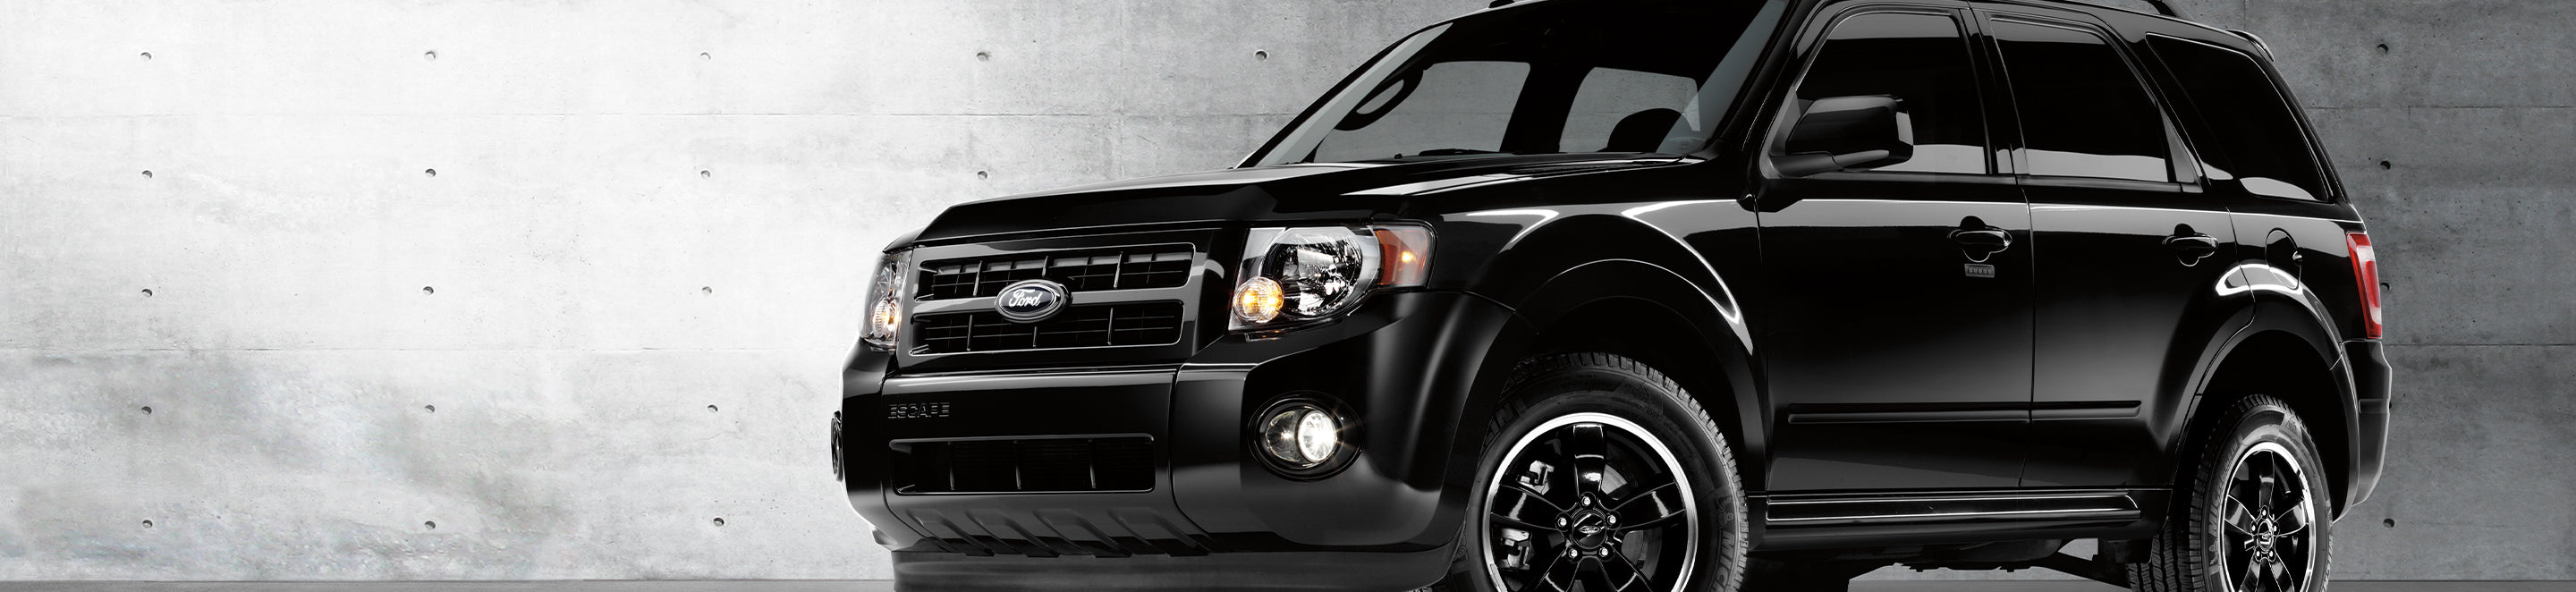 2012 Ford Escape Accessories | Official Site